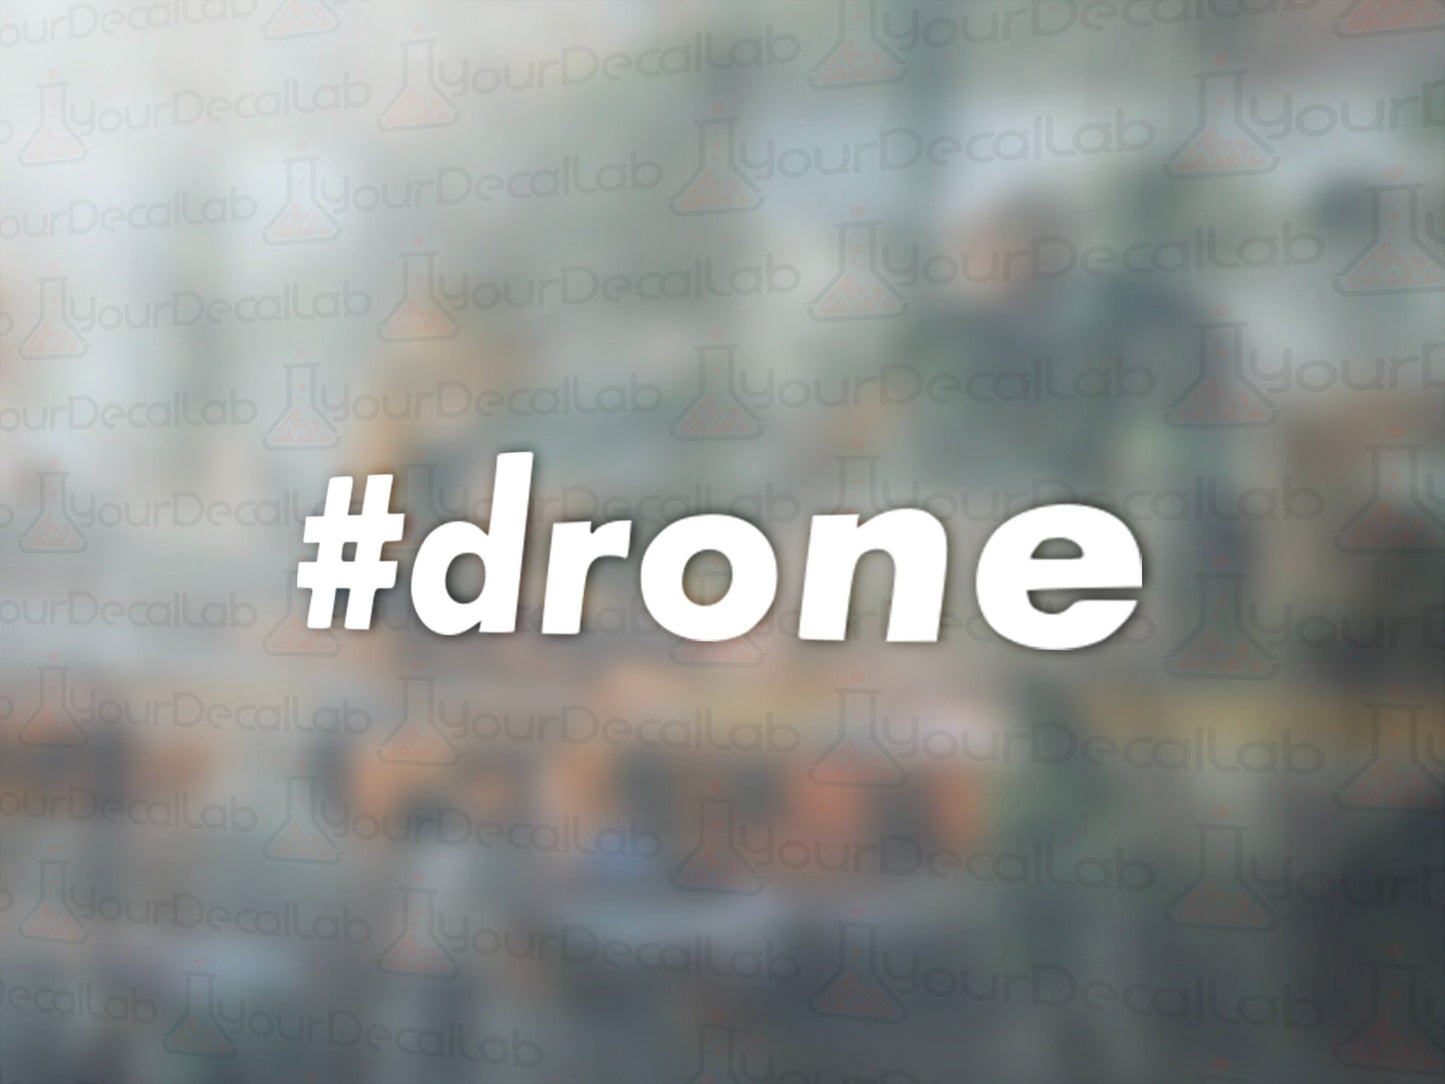 Hashtag Drone Decal - Many Colors & Sizes Trend